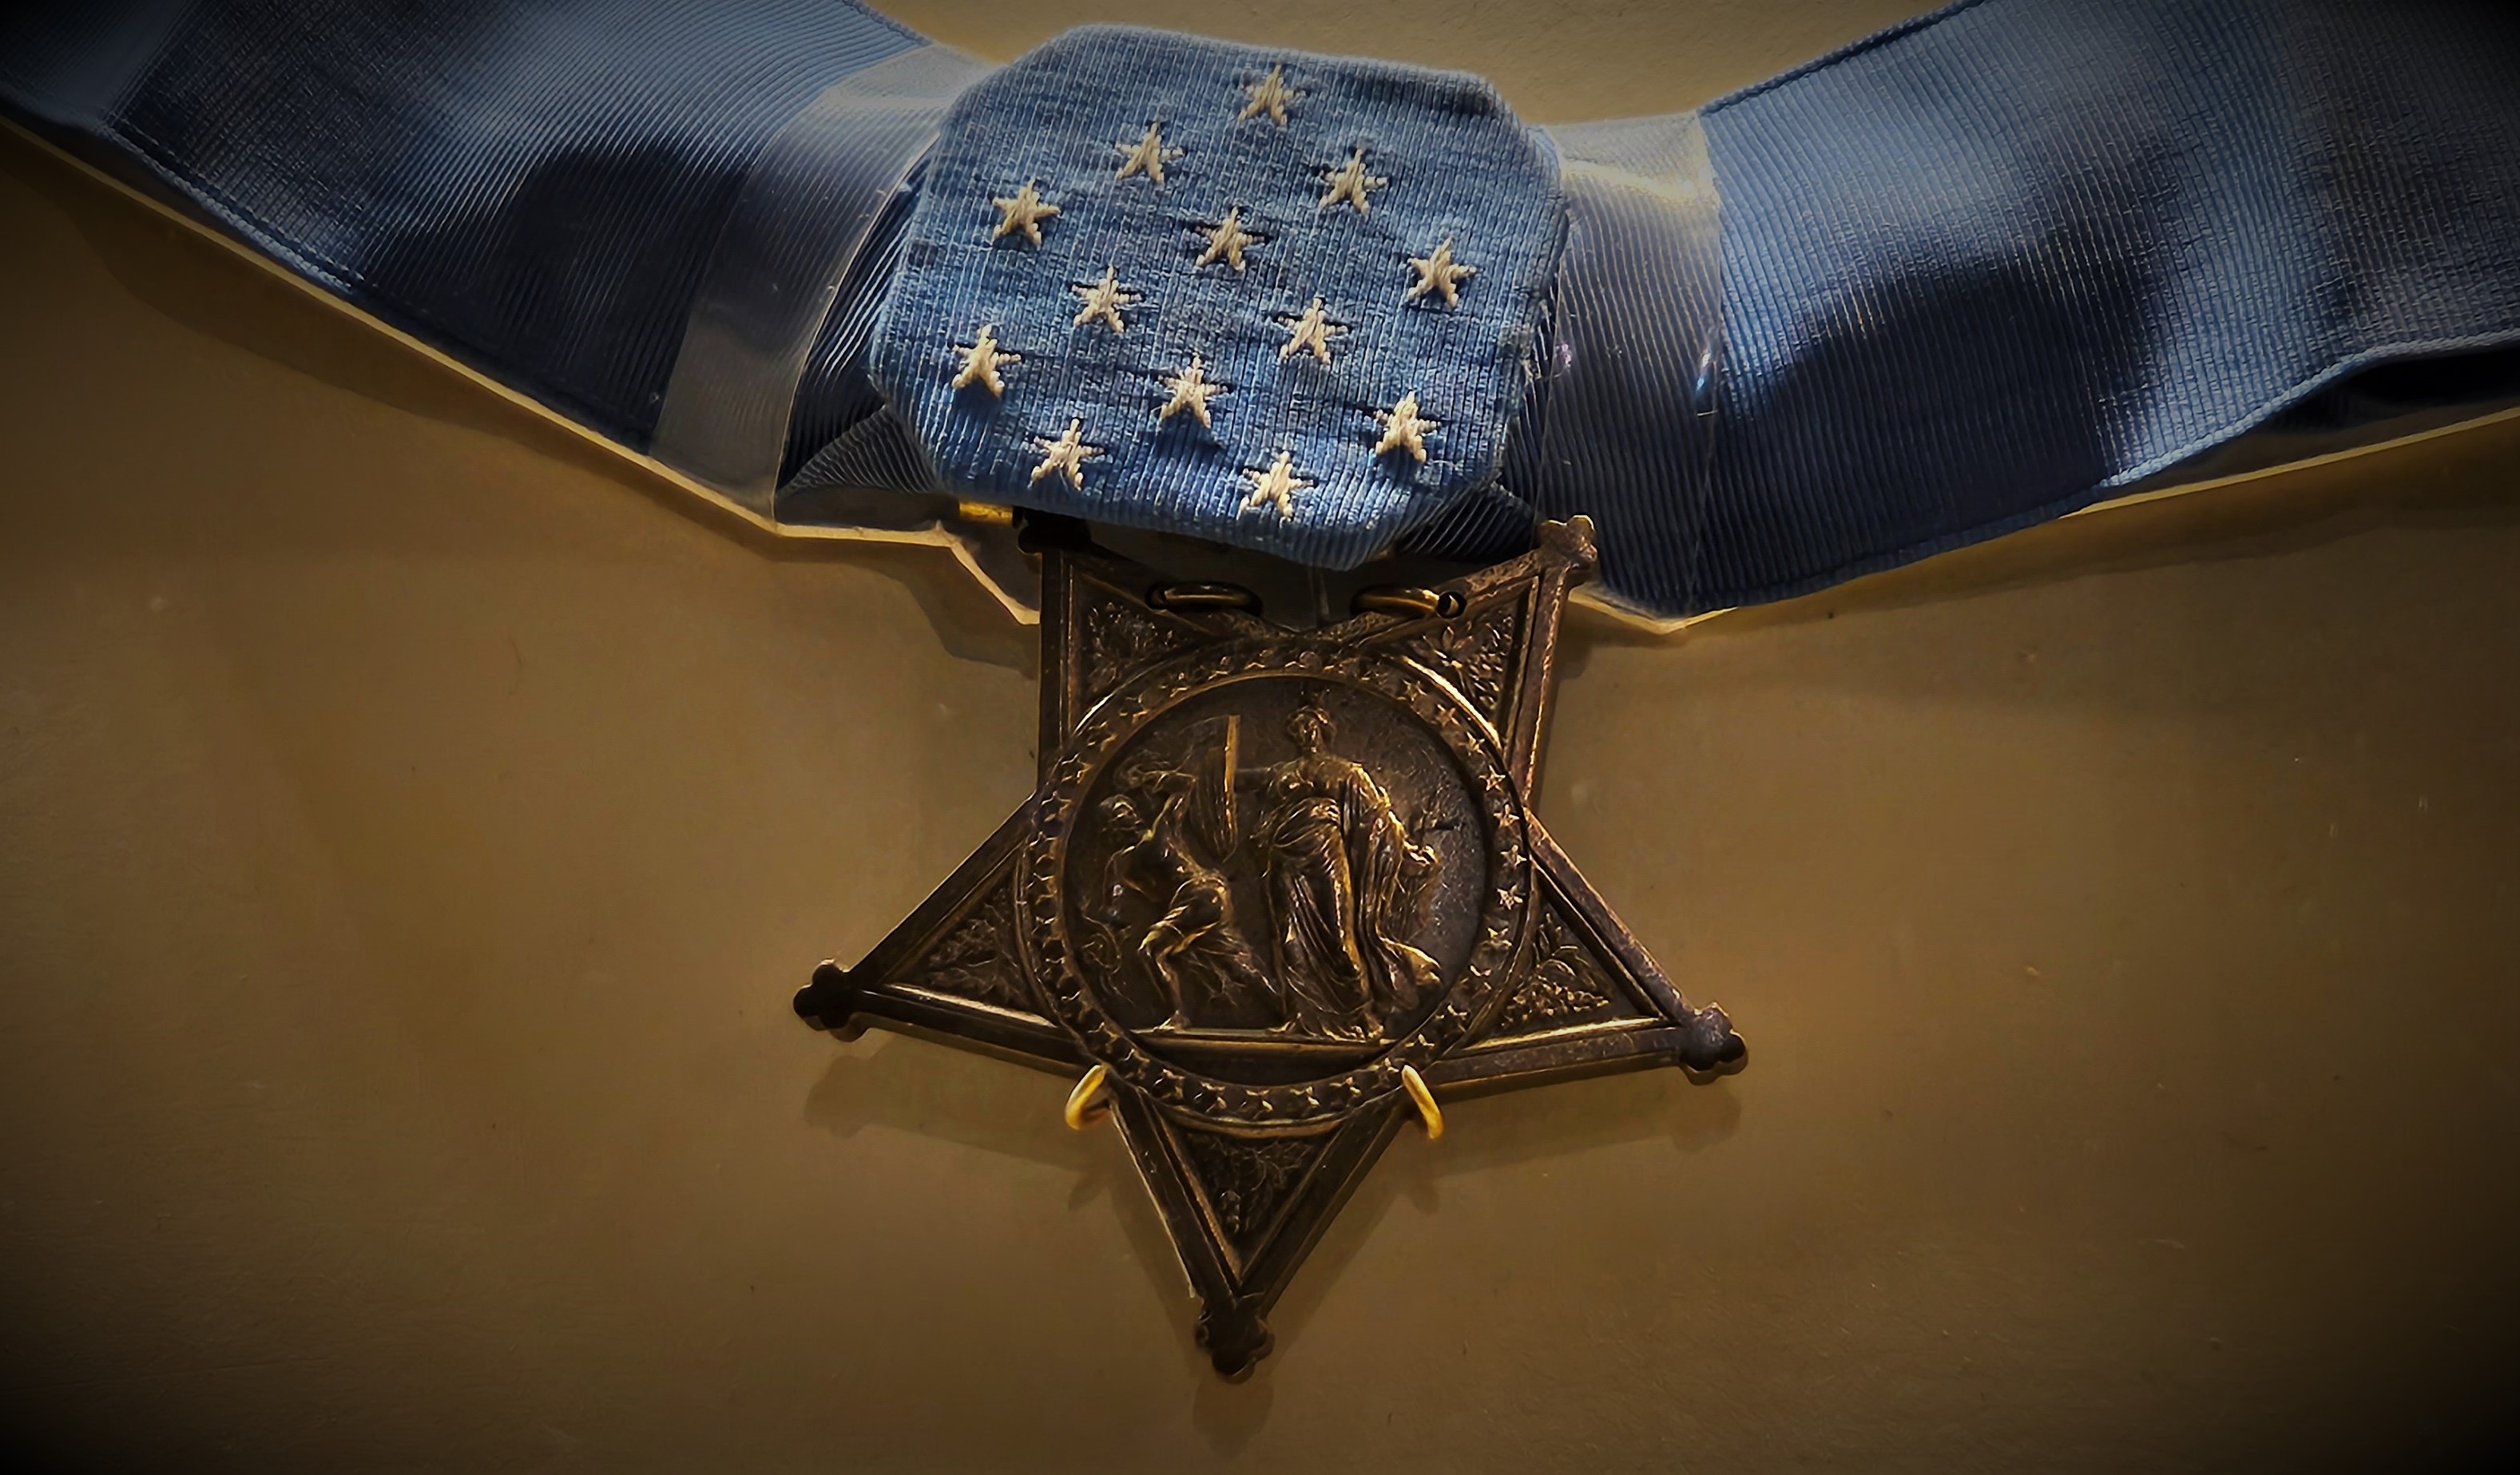 Hutchins’s Medal of Honor in one of The National WWII Museum’s exhibit galleries.